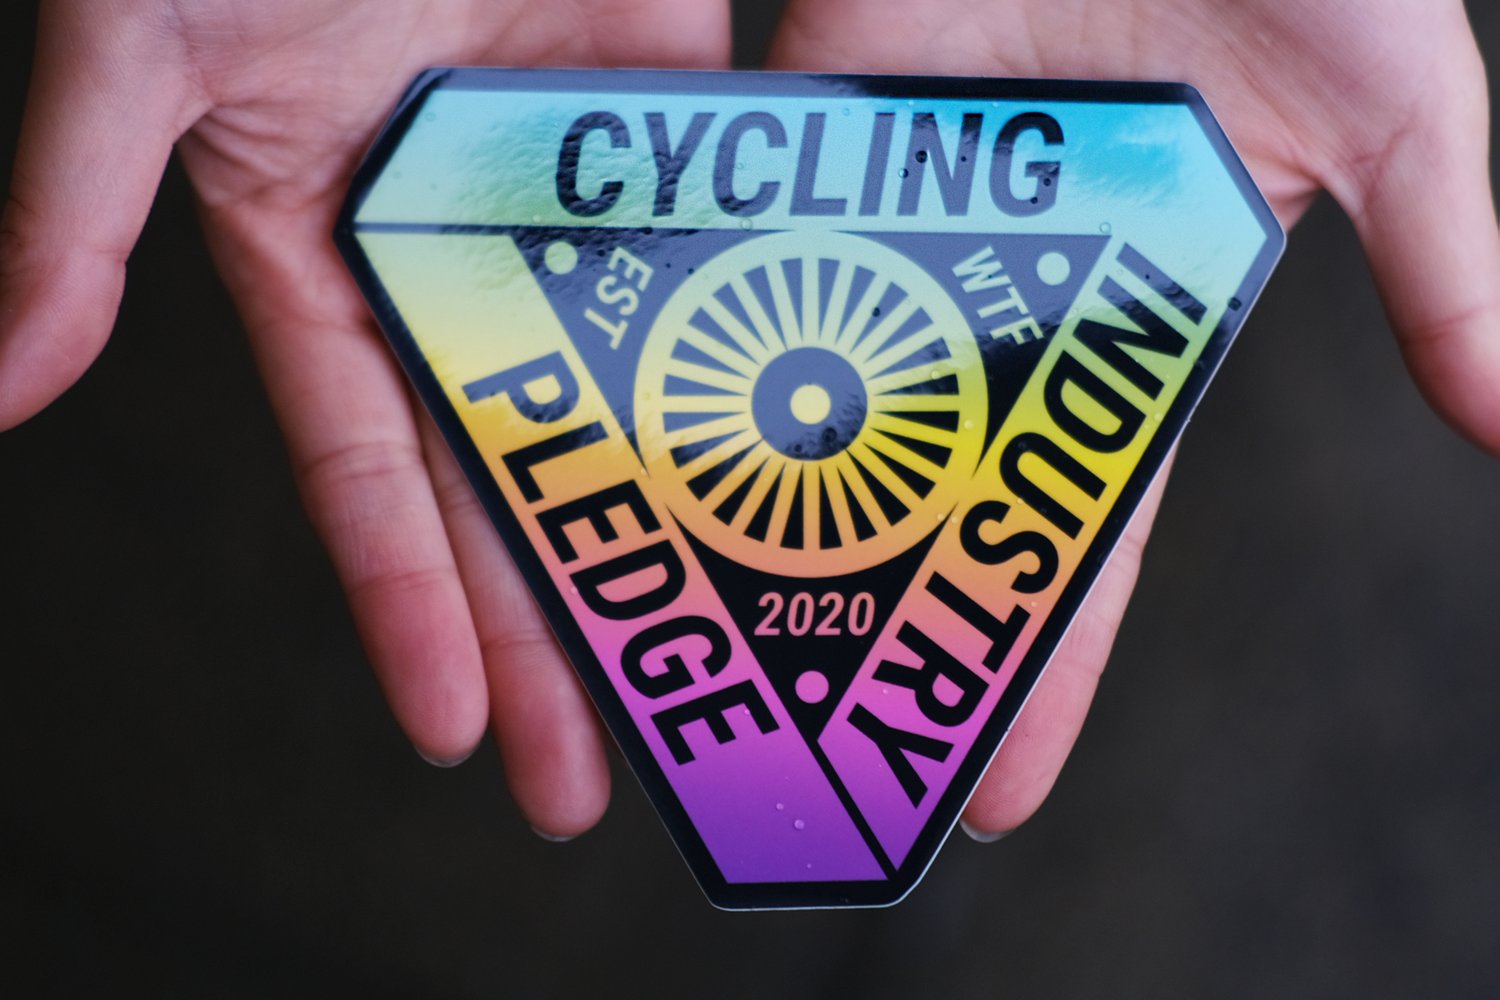 Image of Cycling Industry Pledge Sticker